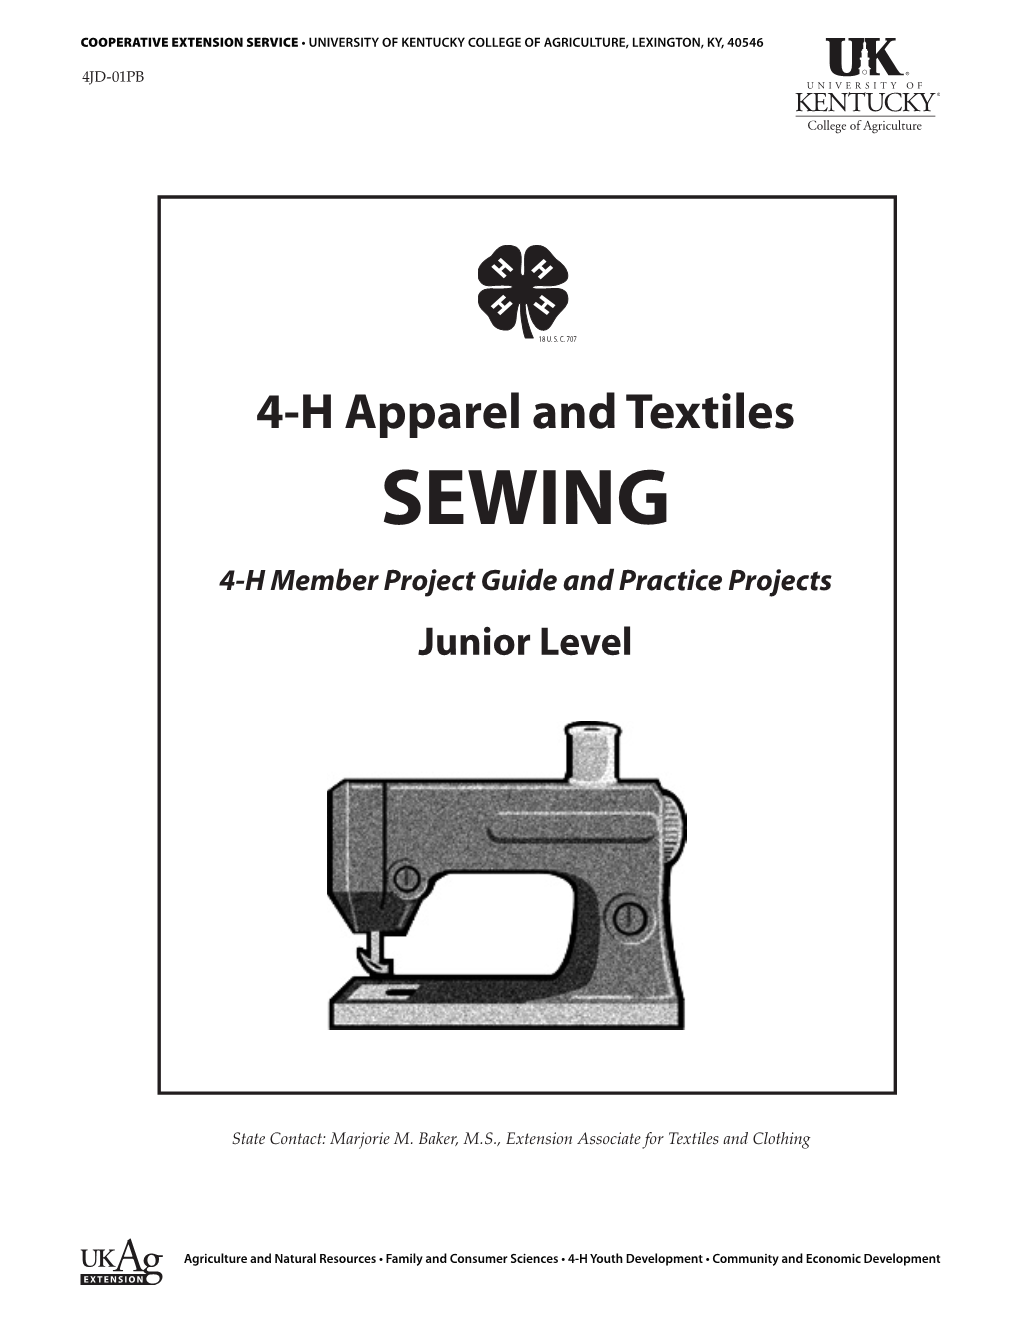 4-H Apparel and Textiles: Sewing Junior Level